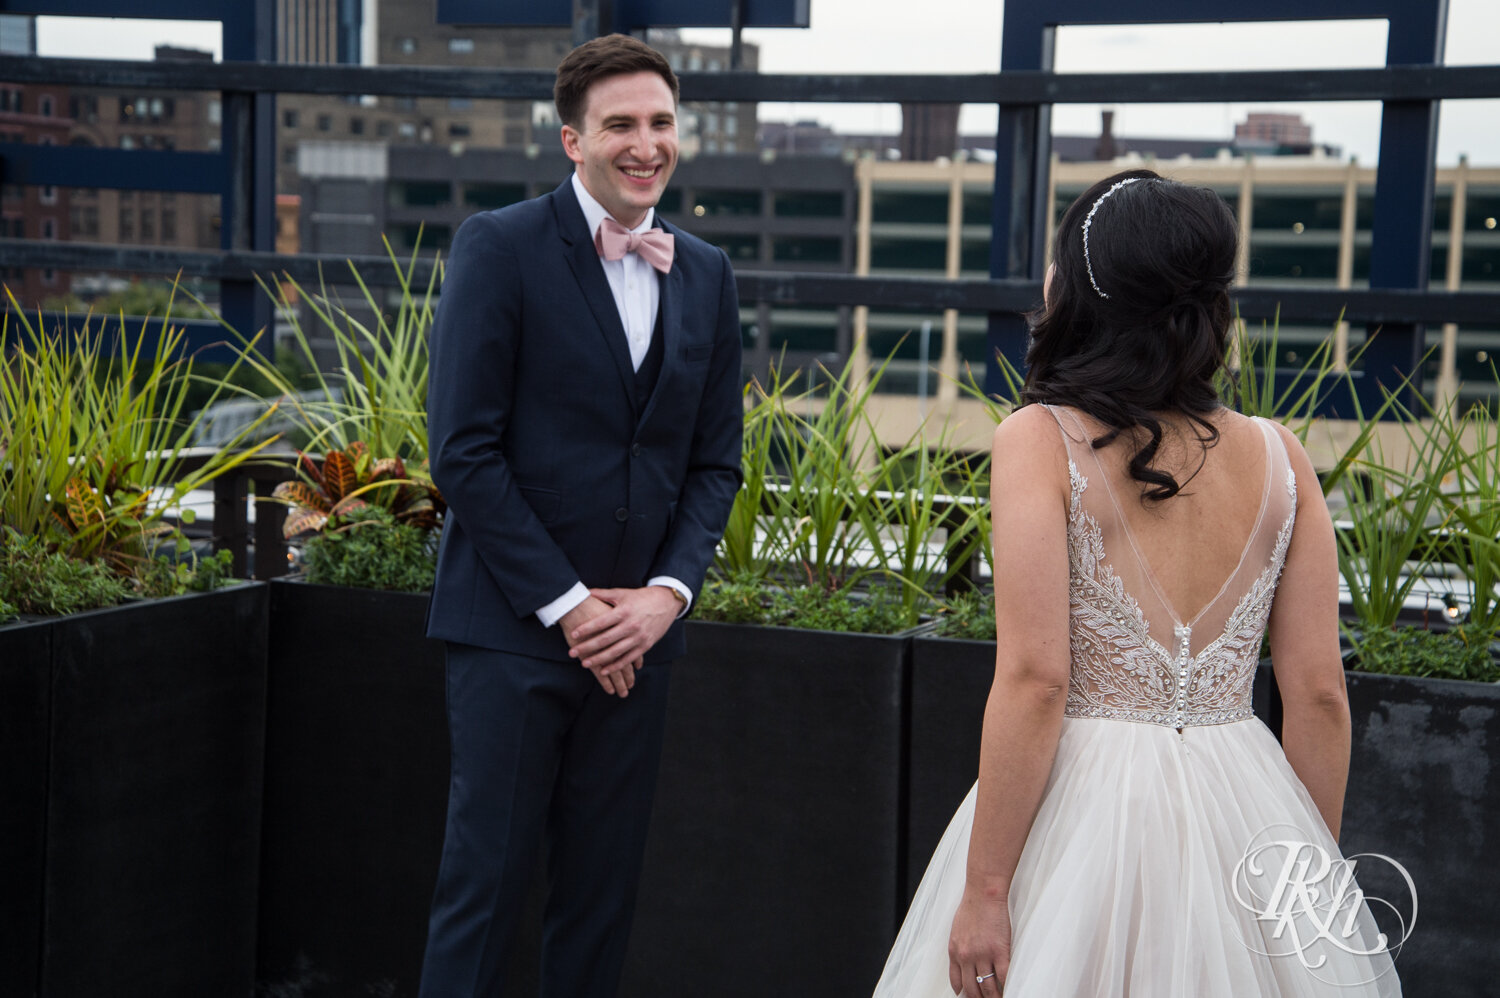 Asian bride and groom share first look on rooftop of the Hewing Hotel in Minneapolis, Minnesota.